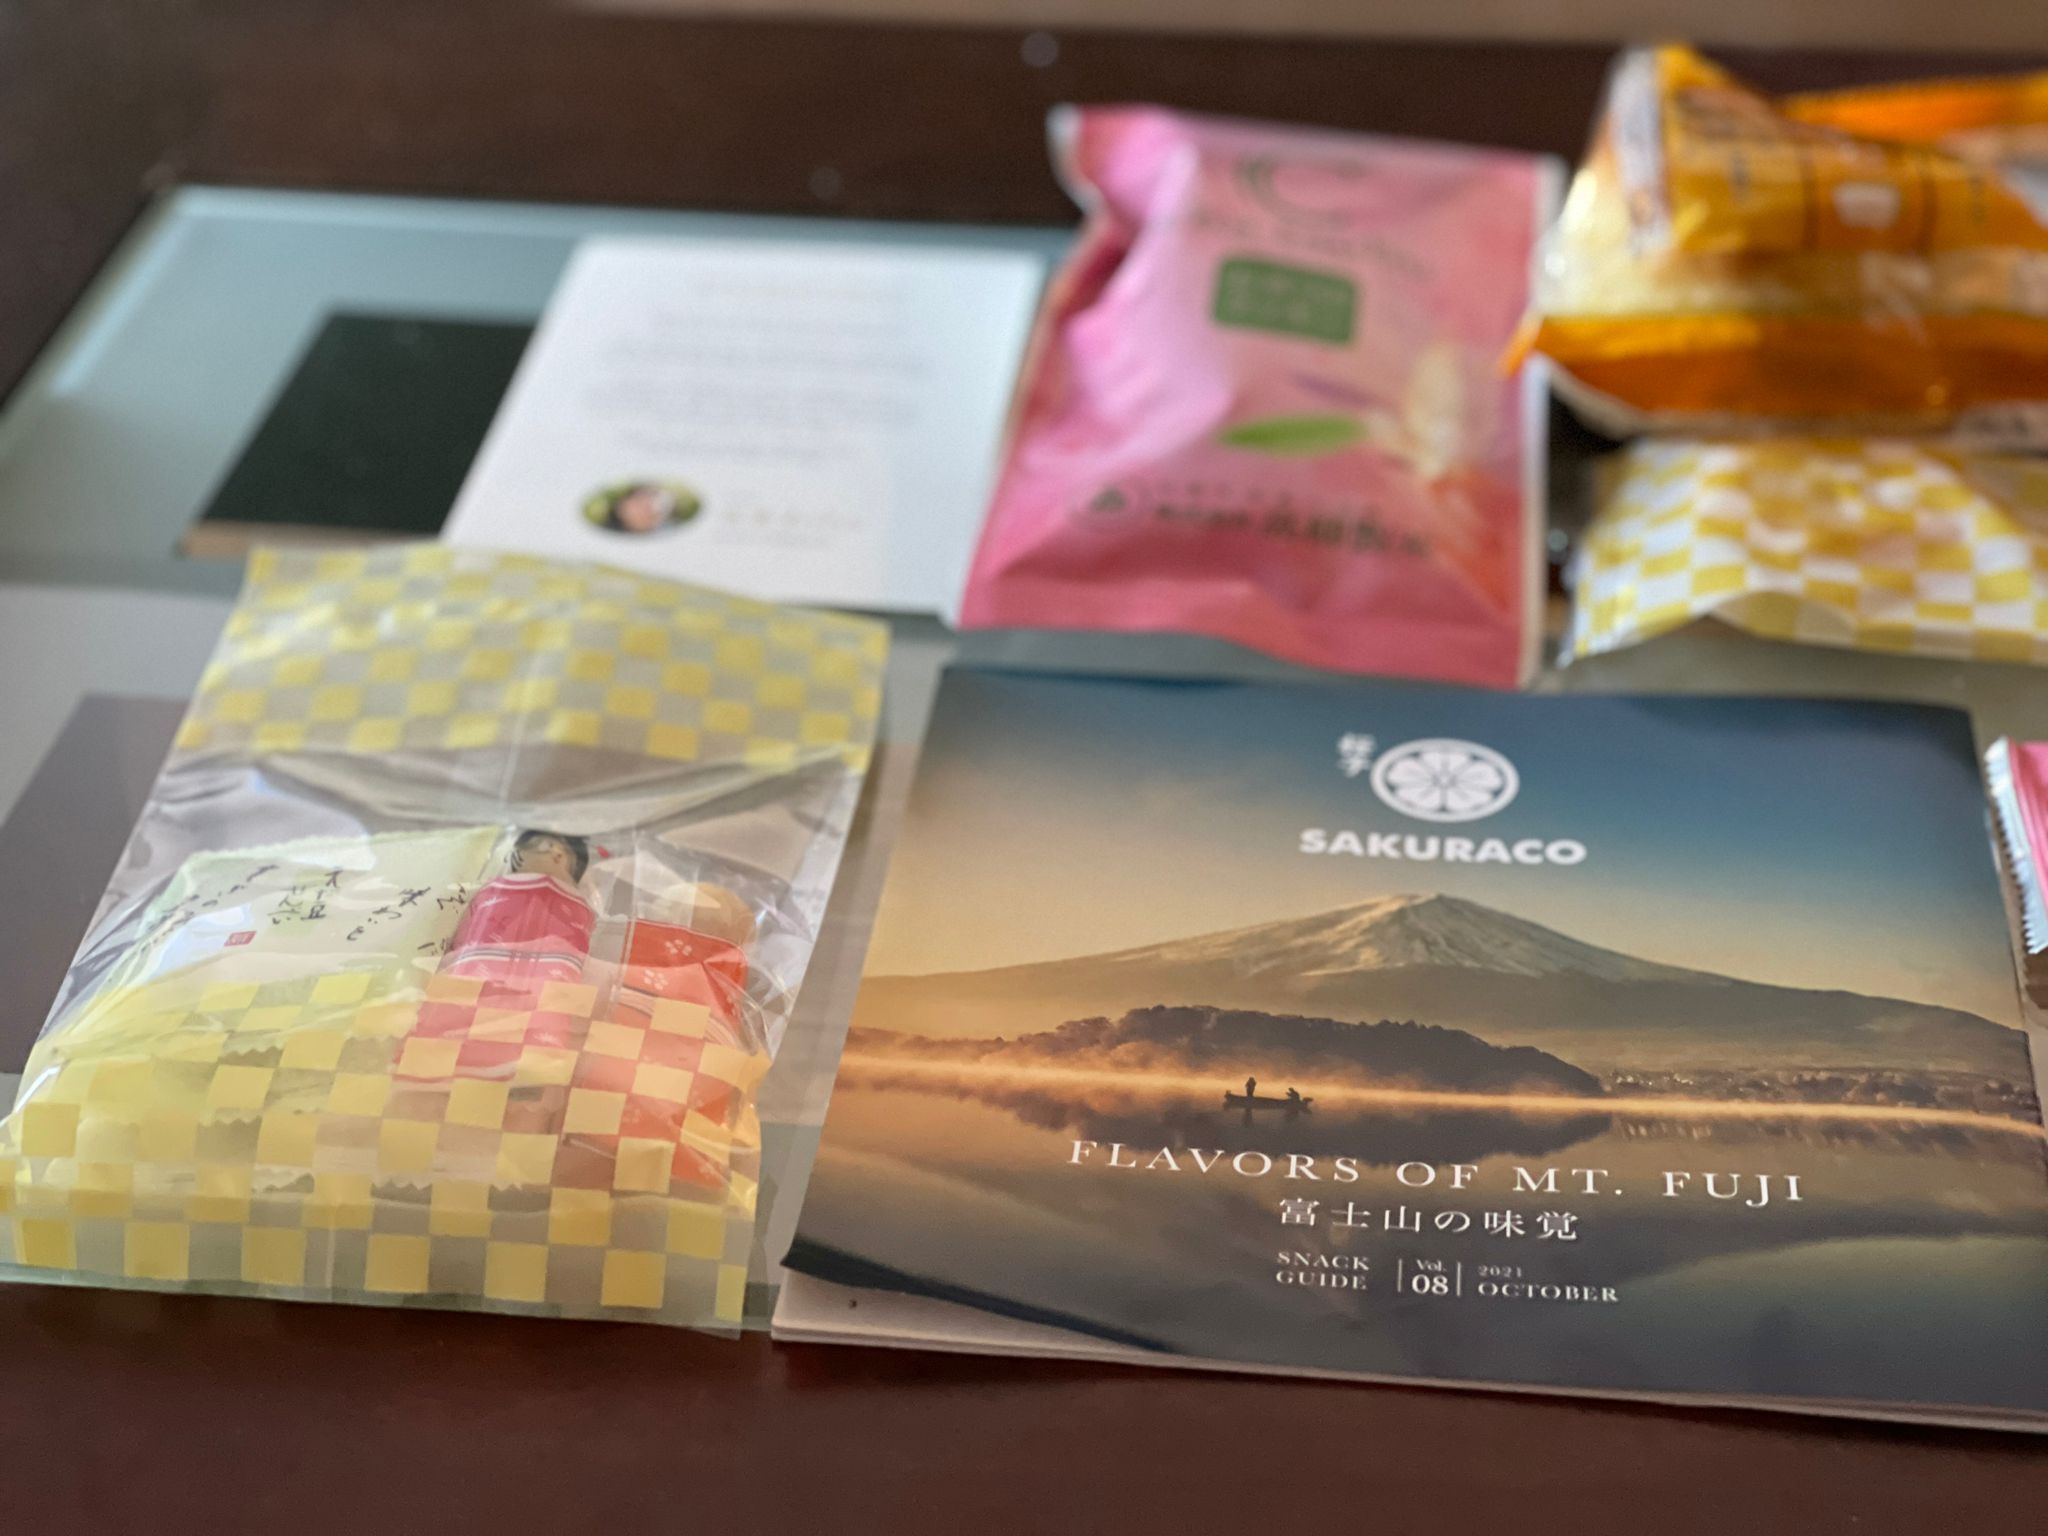 Sakuraco Authentic Japanese Snacks Made by Local Makers in Japan